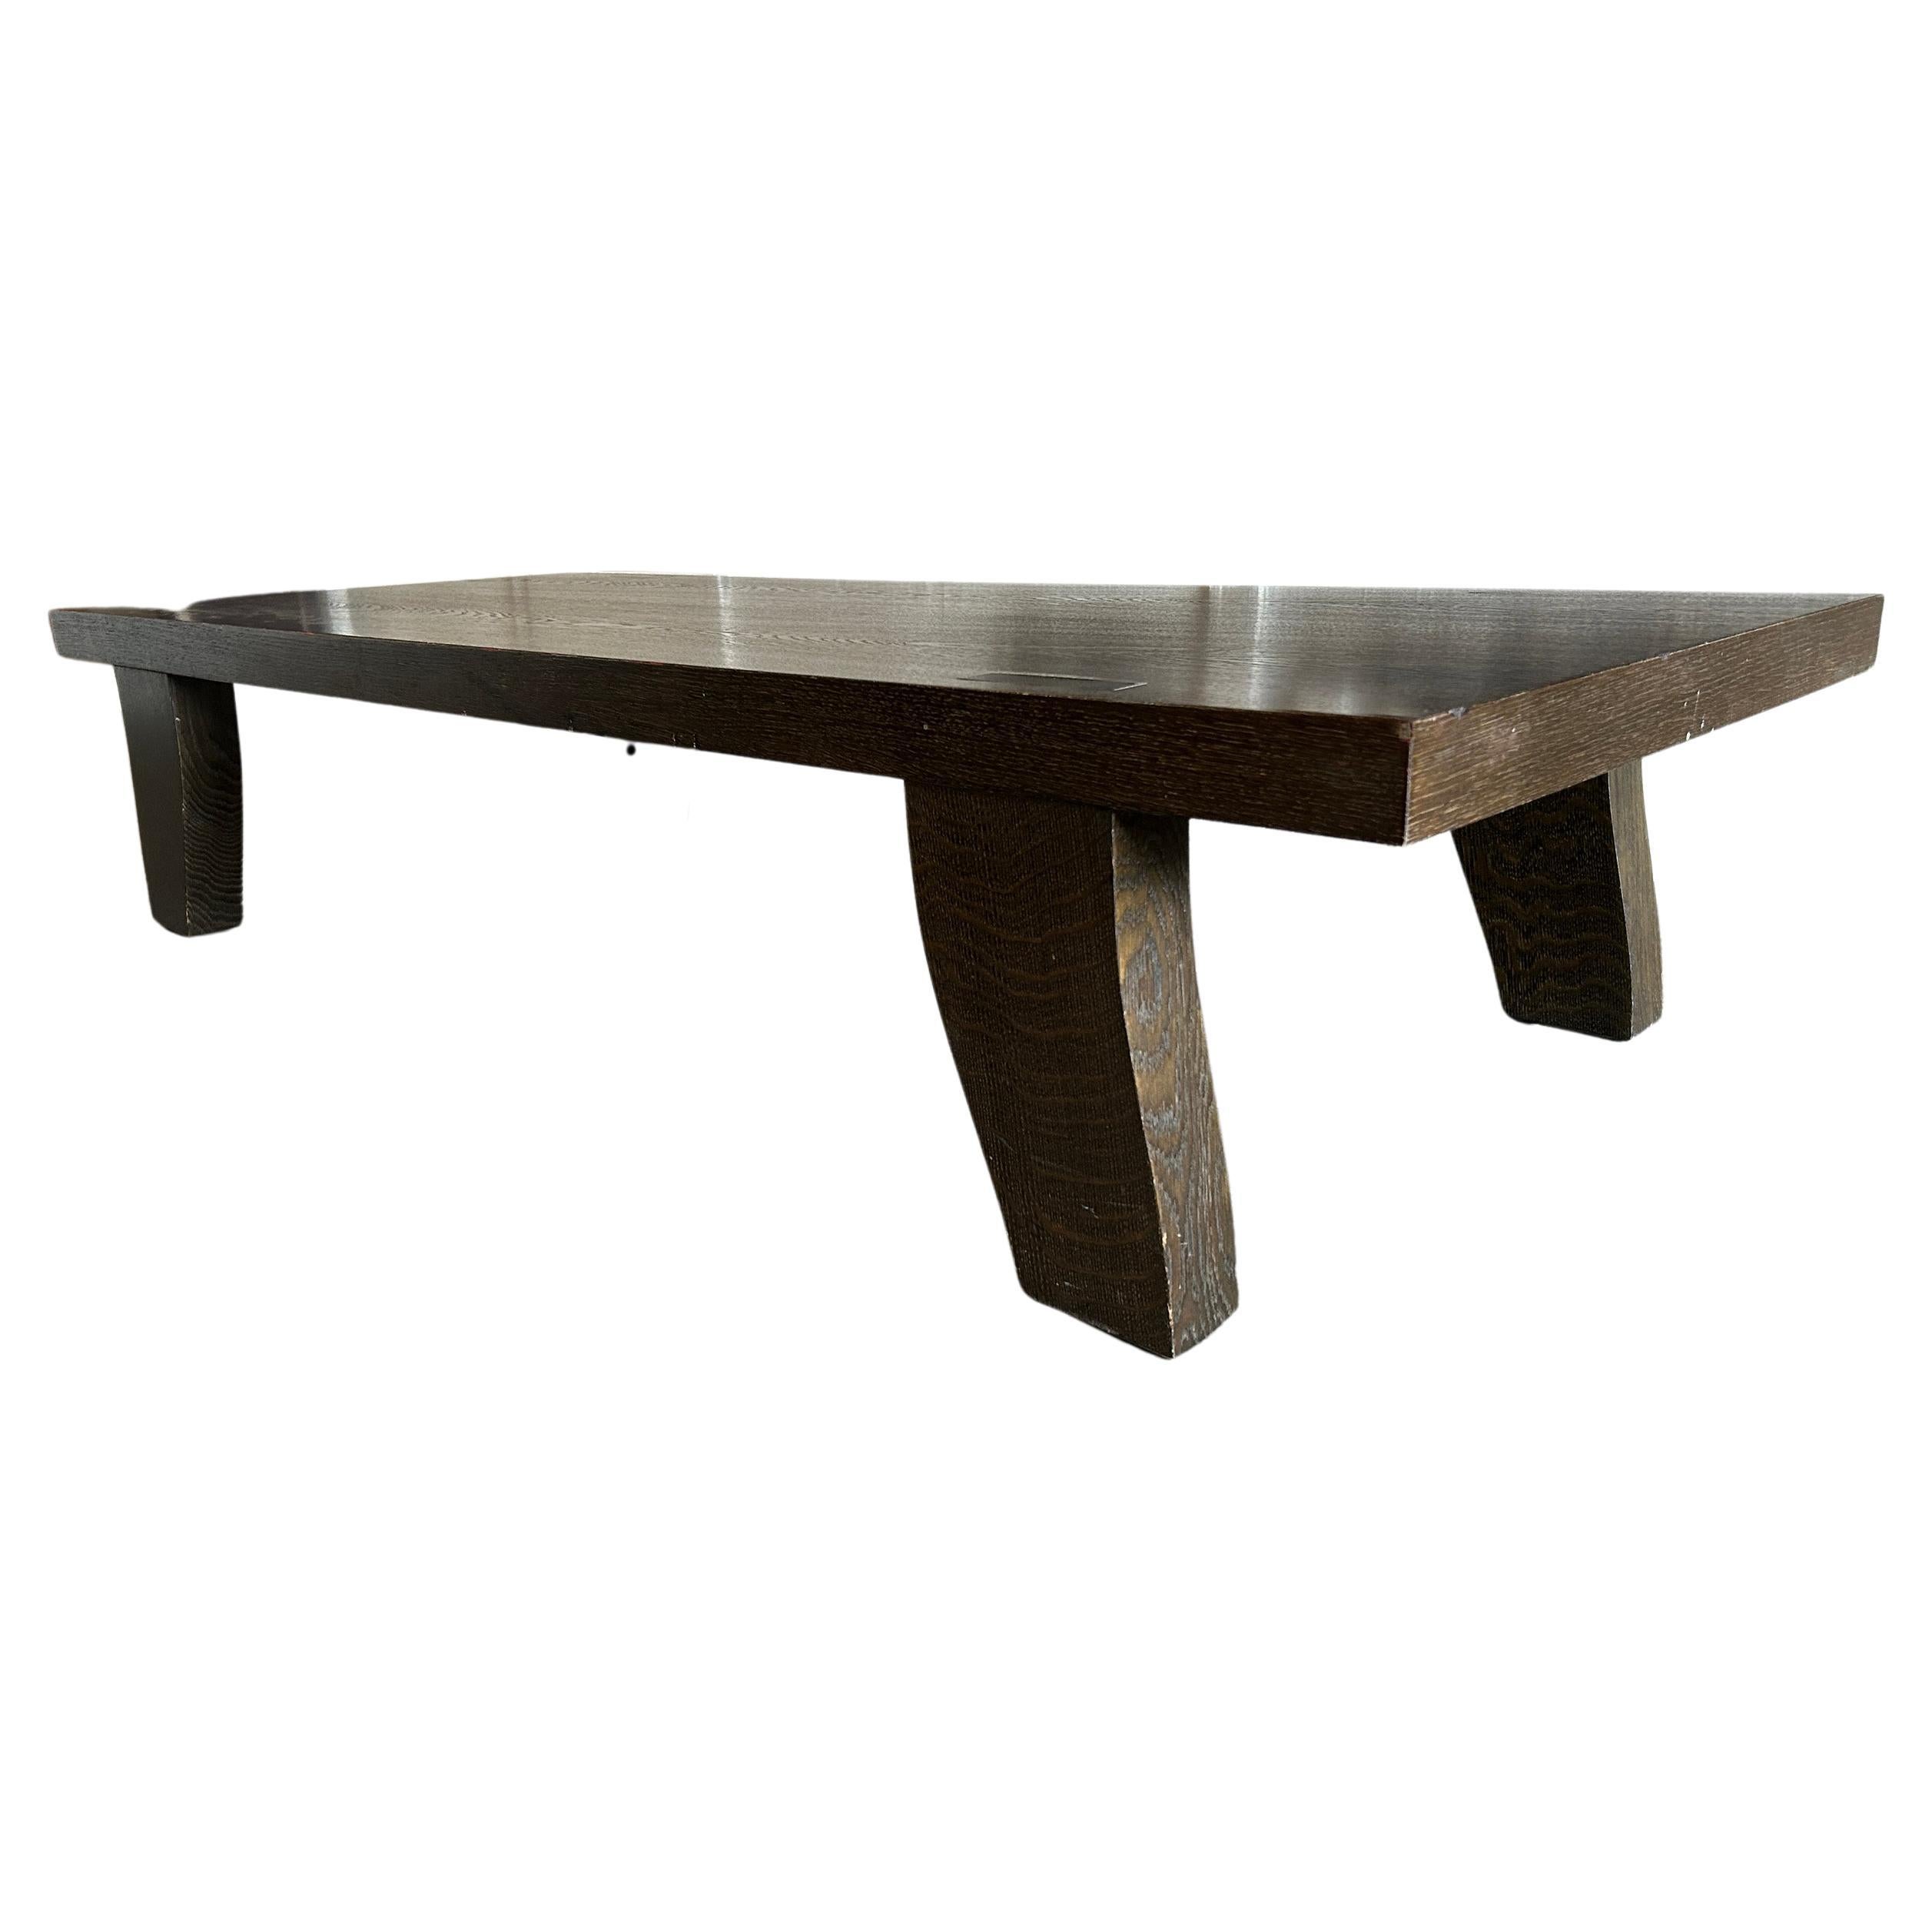 Organic Modern Philippe Hurel Large Low Solid Oak Coffee Table Dark Brown Finish Made in France For Sale